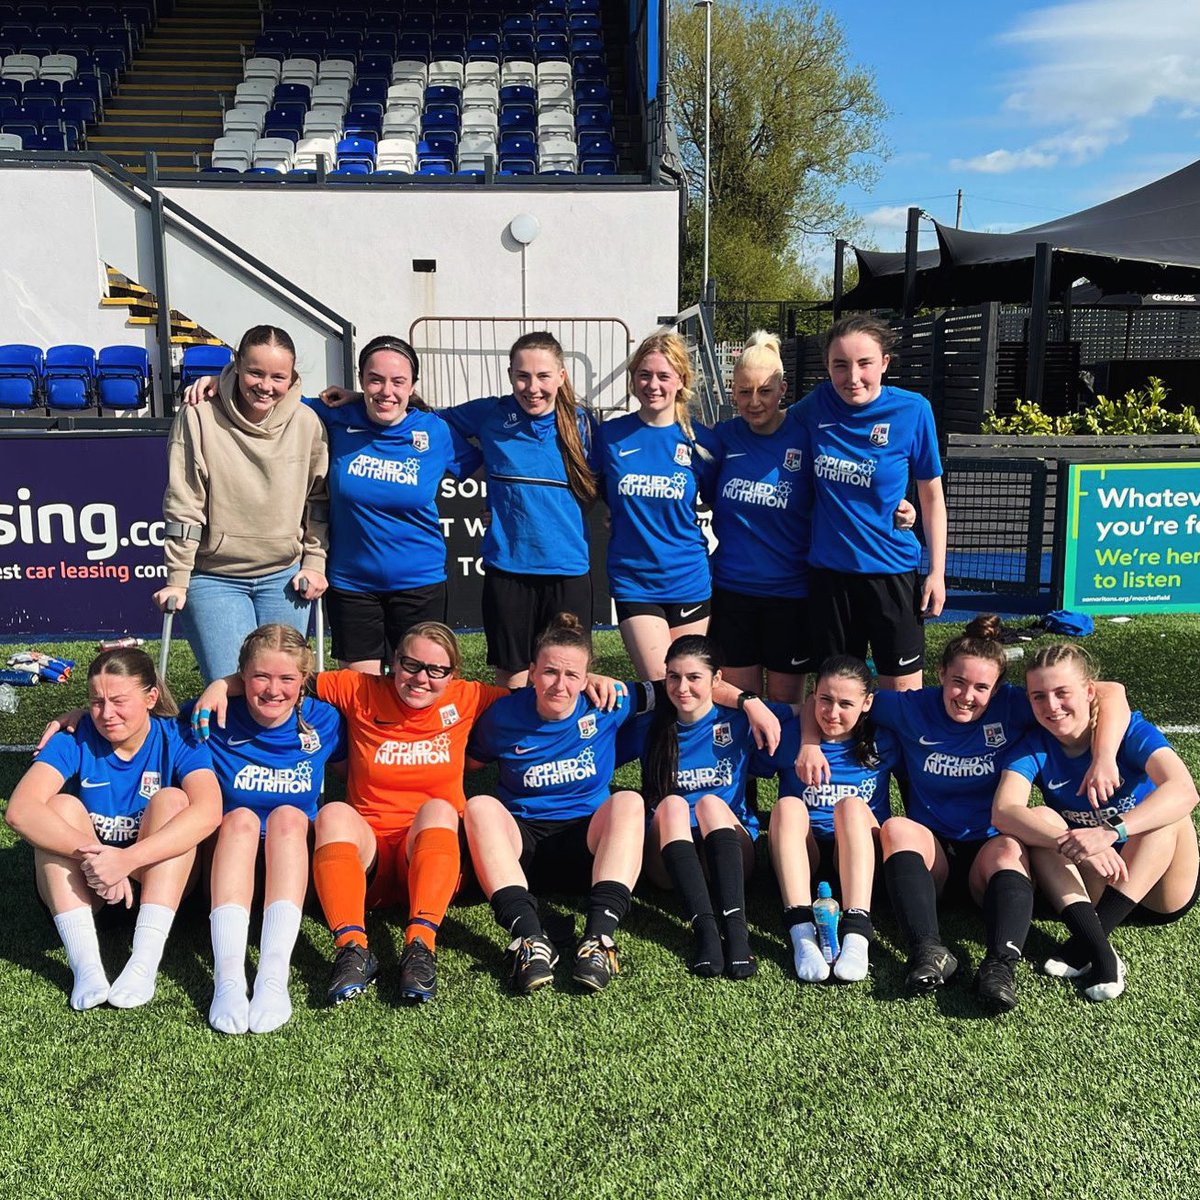 “The Girls are Heros today all of them, to go to Macc with a depleted squad of 13 players due to injury & unavailability and a few with niggles and put that shift in is absolutely unbelievable, the girls have some serious heart and course for each other”

#TogetherUnited ⚽️🔵⚪️💙